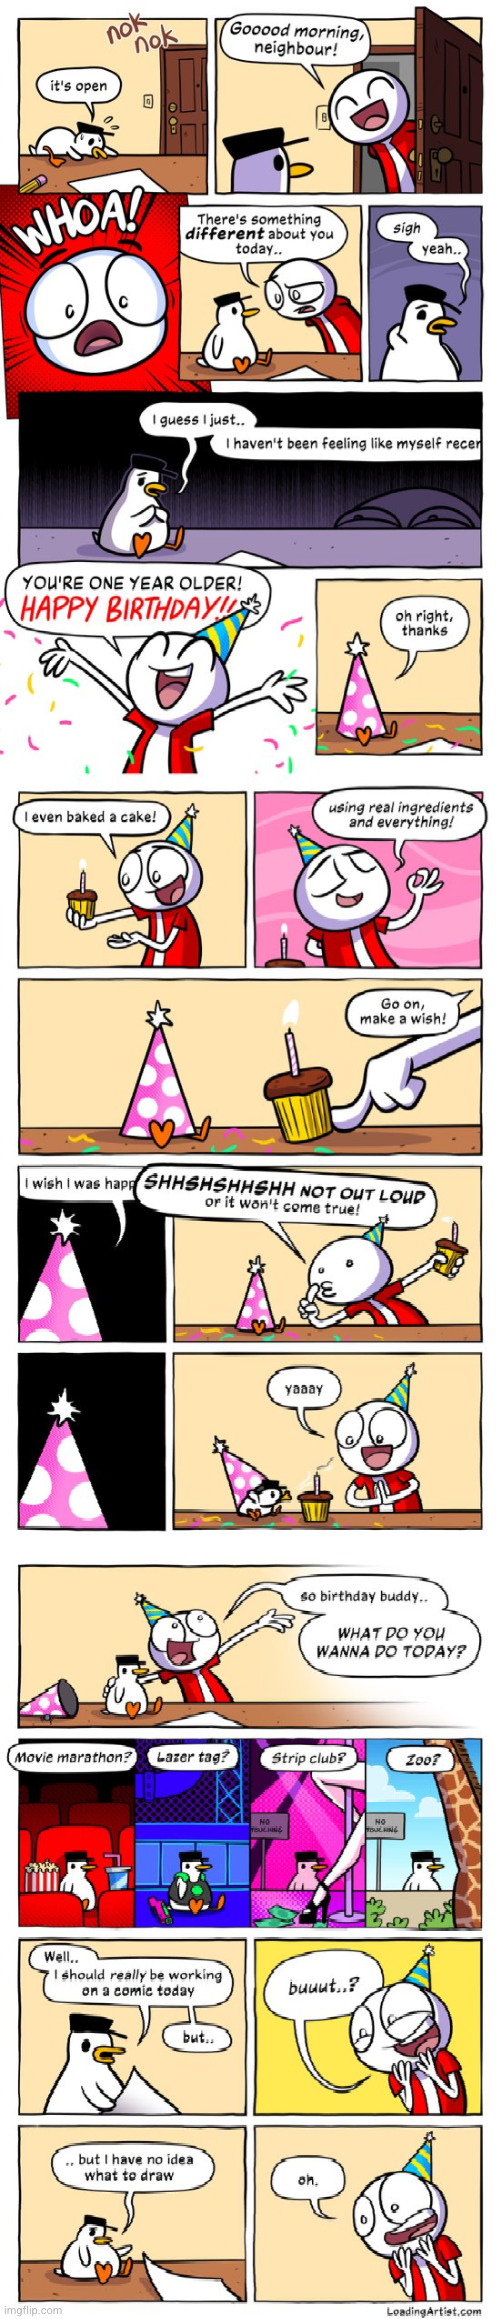 #2,670 | image tagged in comics/cartoons,comics,loading,artist,birthday,plucked up | made w/ Imgflip meme maker